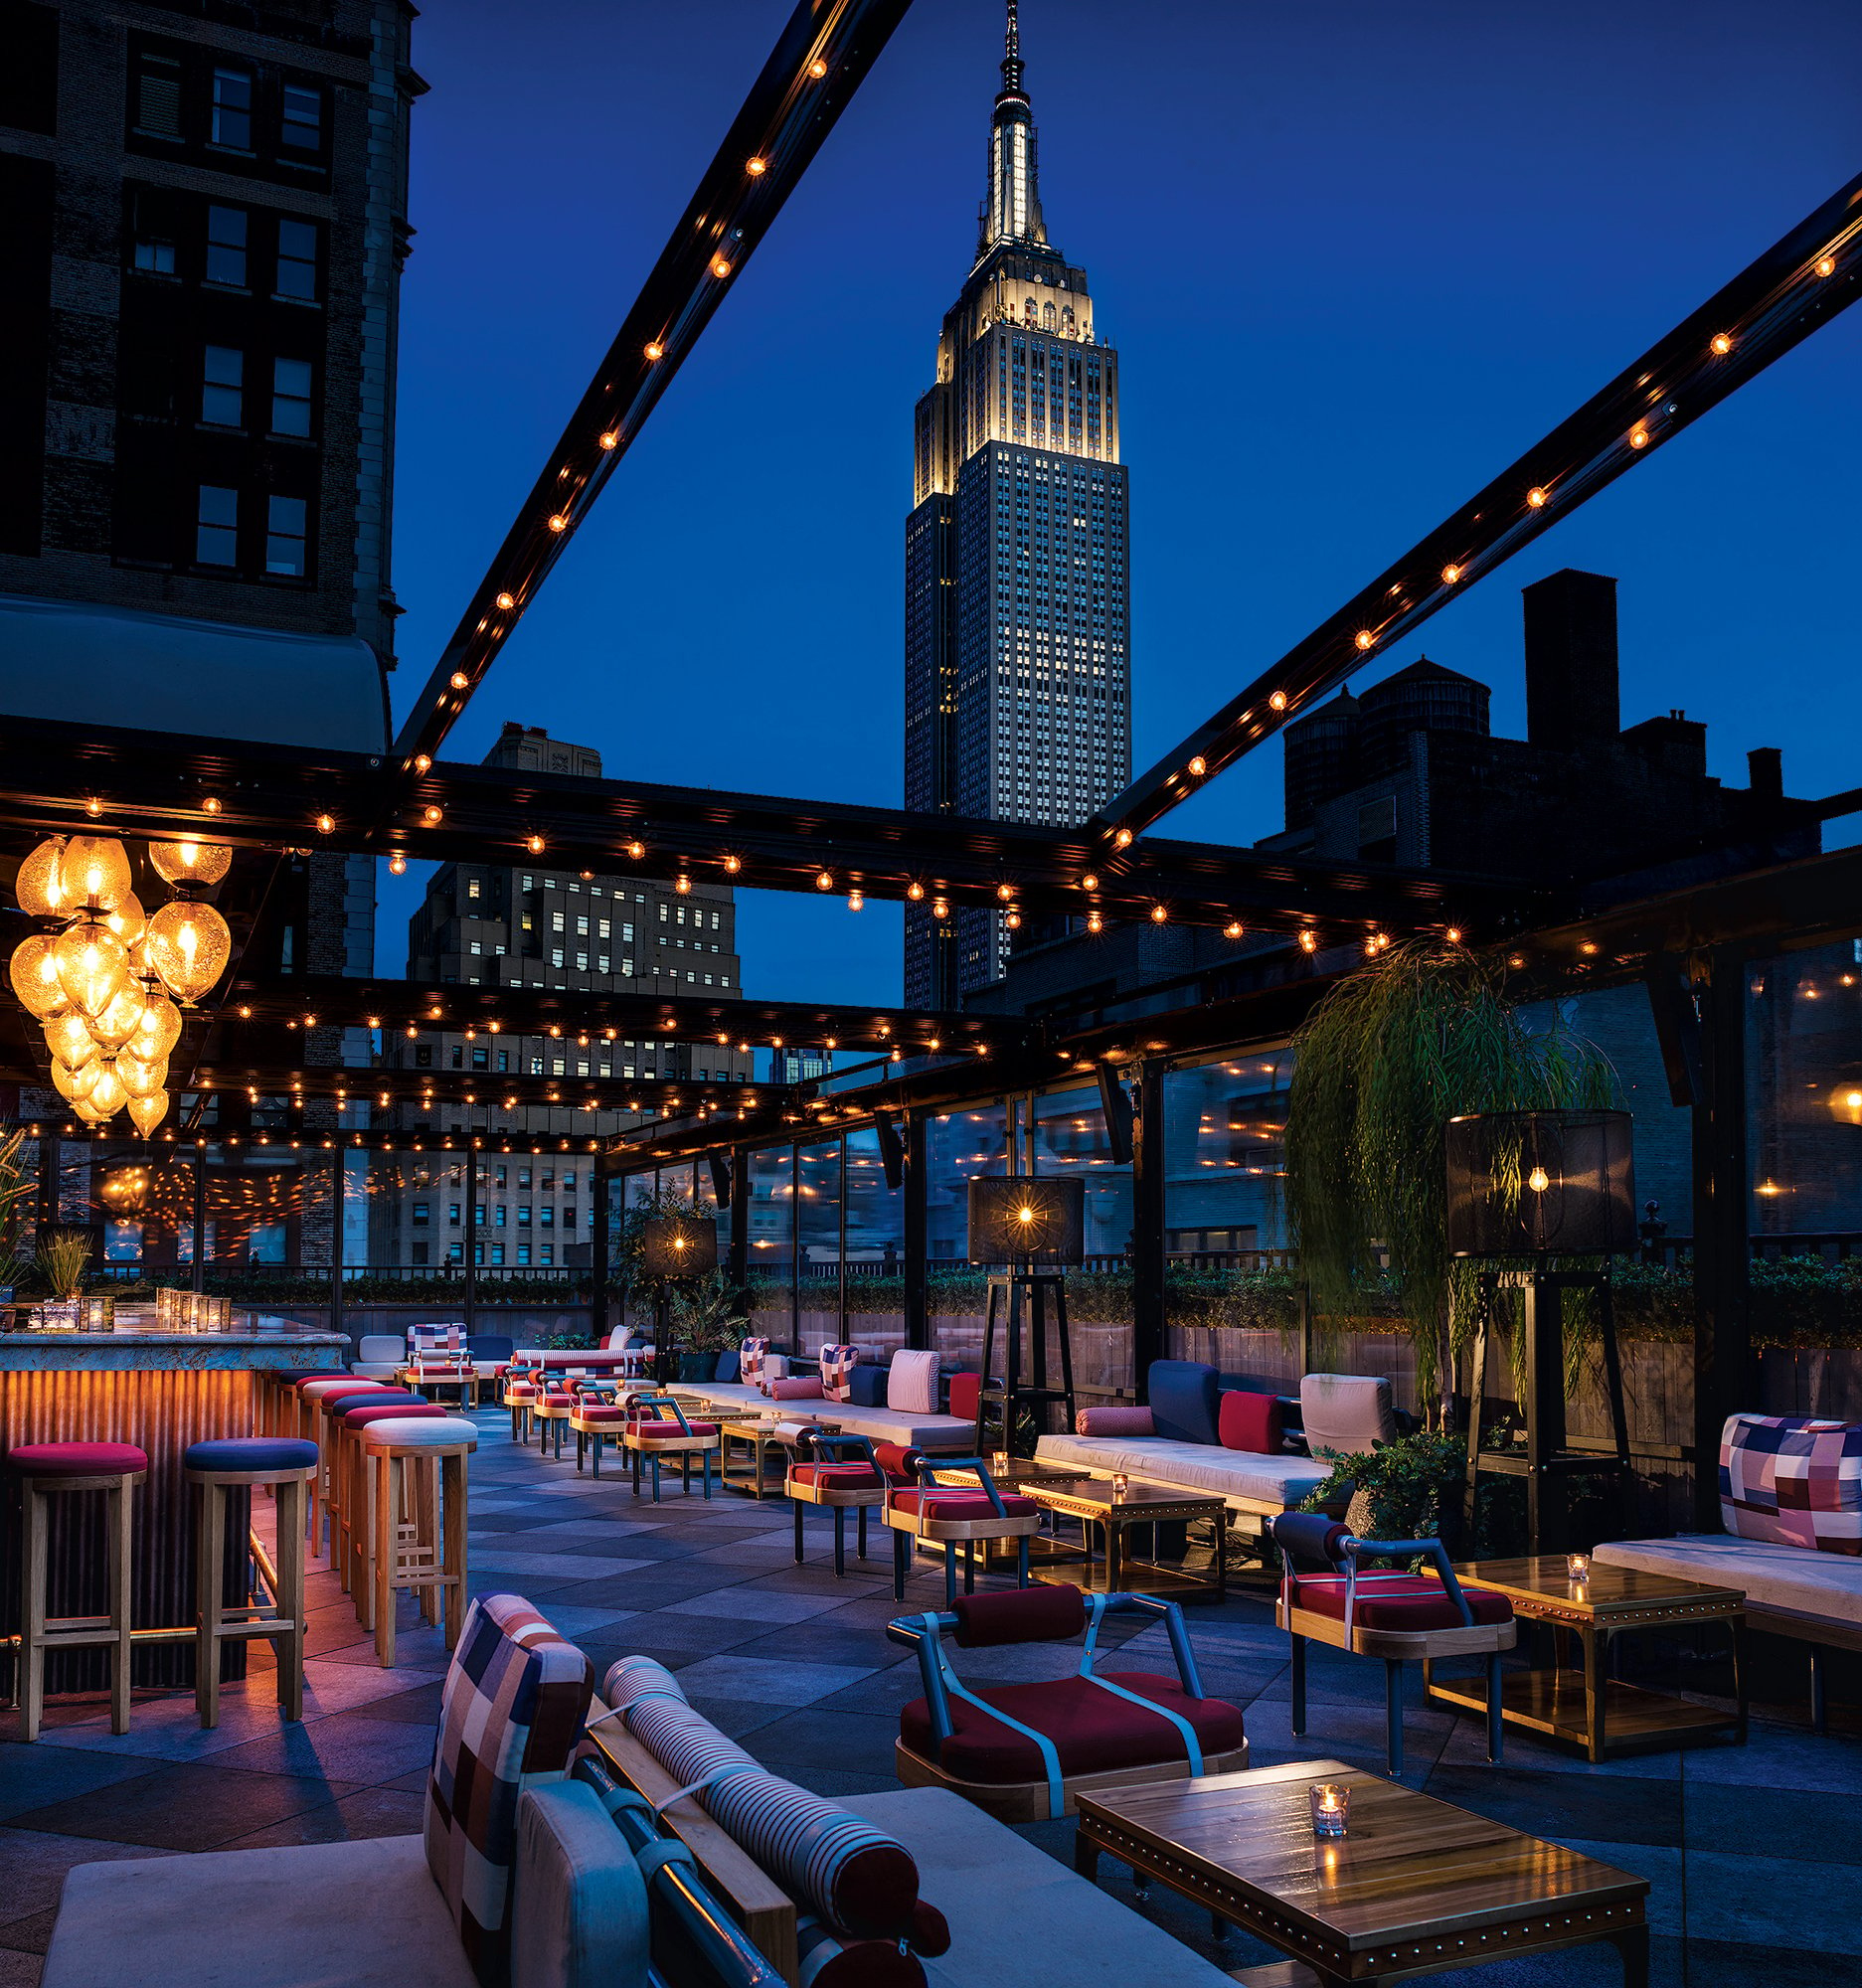 Magic Hour lounge offers a magical view of New York—and complimentary mini-golf on the roof. For more of our favorite free things to do on a visit to the Big Apple, turn the page. Photograph by Warren Jagger.